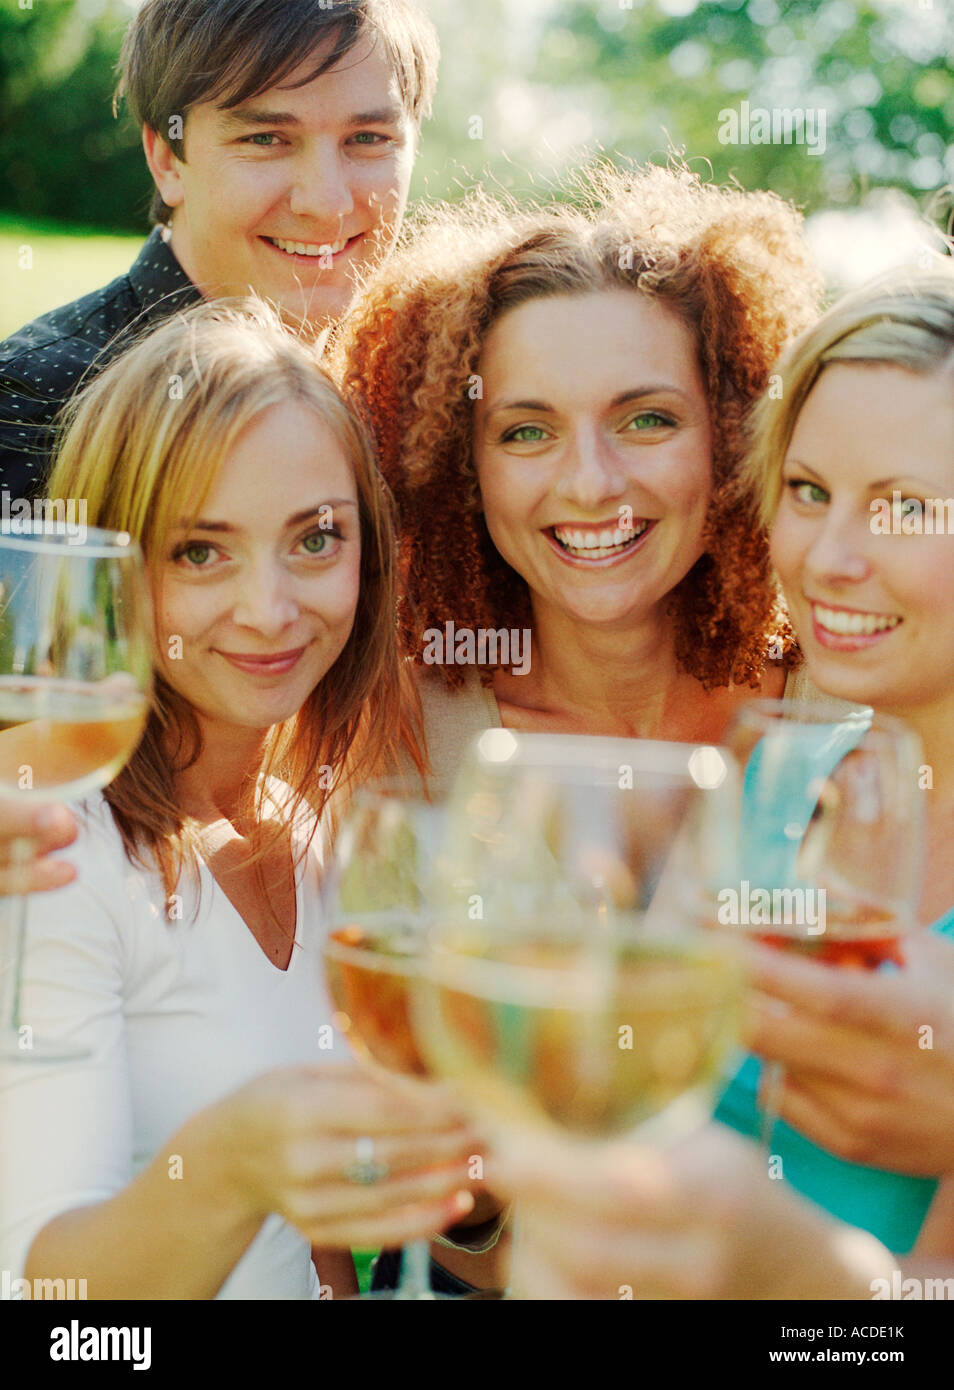 A group of smiling people raising their glasses and looking into the camera. Stock Photo